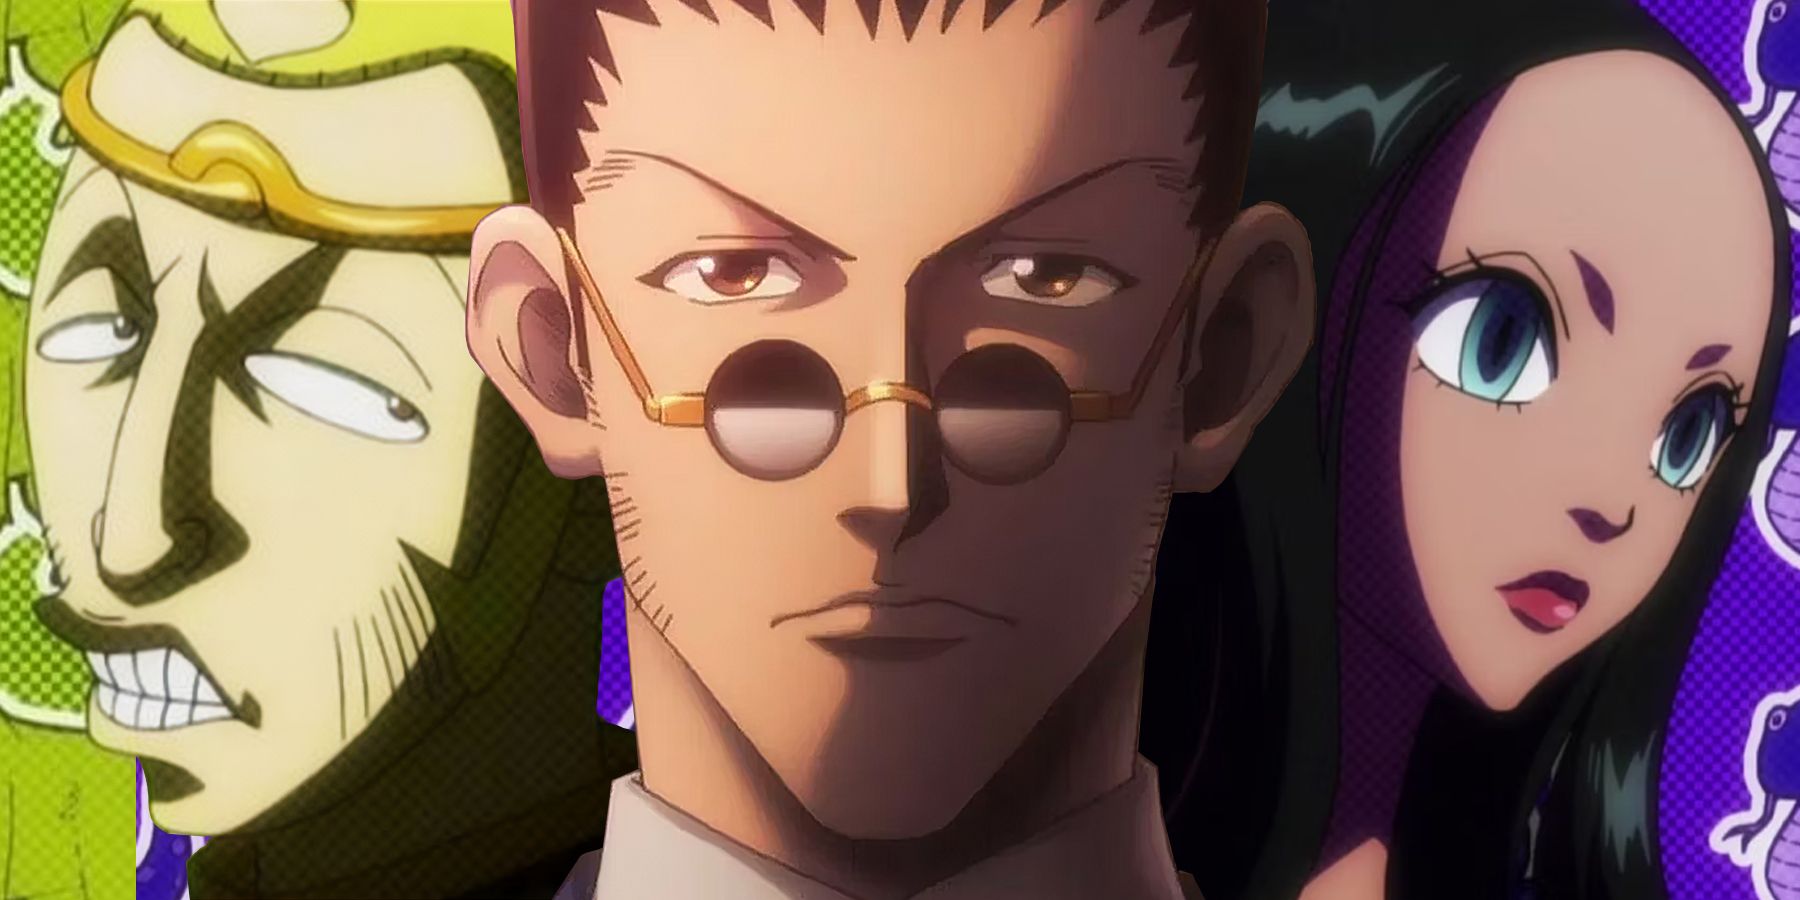 Why Hunter x Hunter Stays Relevant